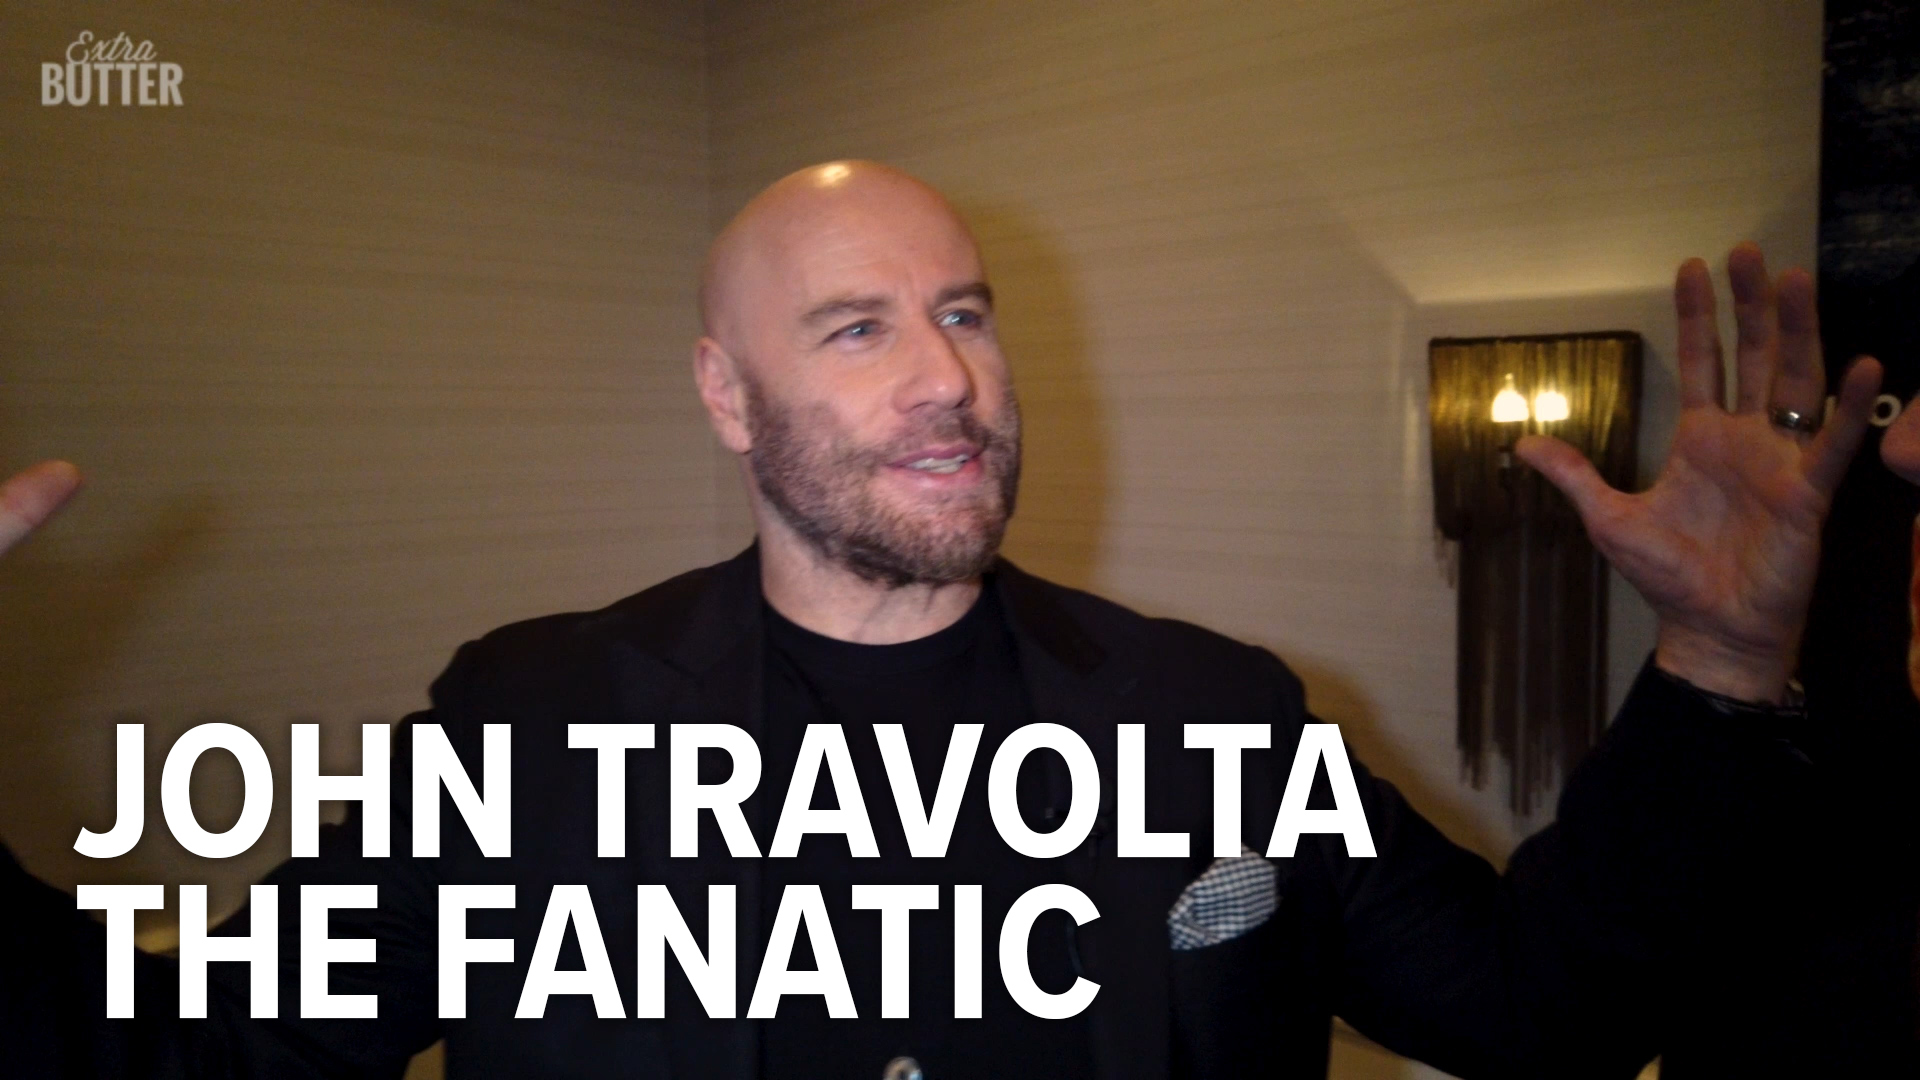 John Travolta talks about why he loves his fans in this exclusive interview for his new movie 'The Fanatic.' Travolta also shares some awkward fan encounters and what it was like working with director Fred Durst (Limp Bizkit).